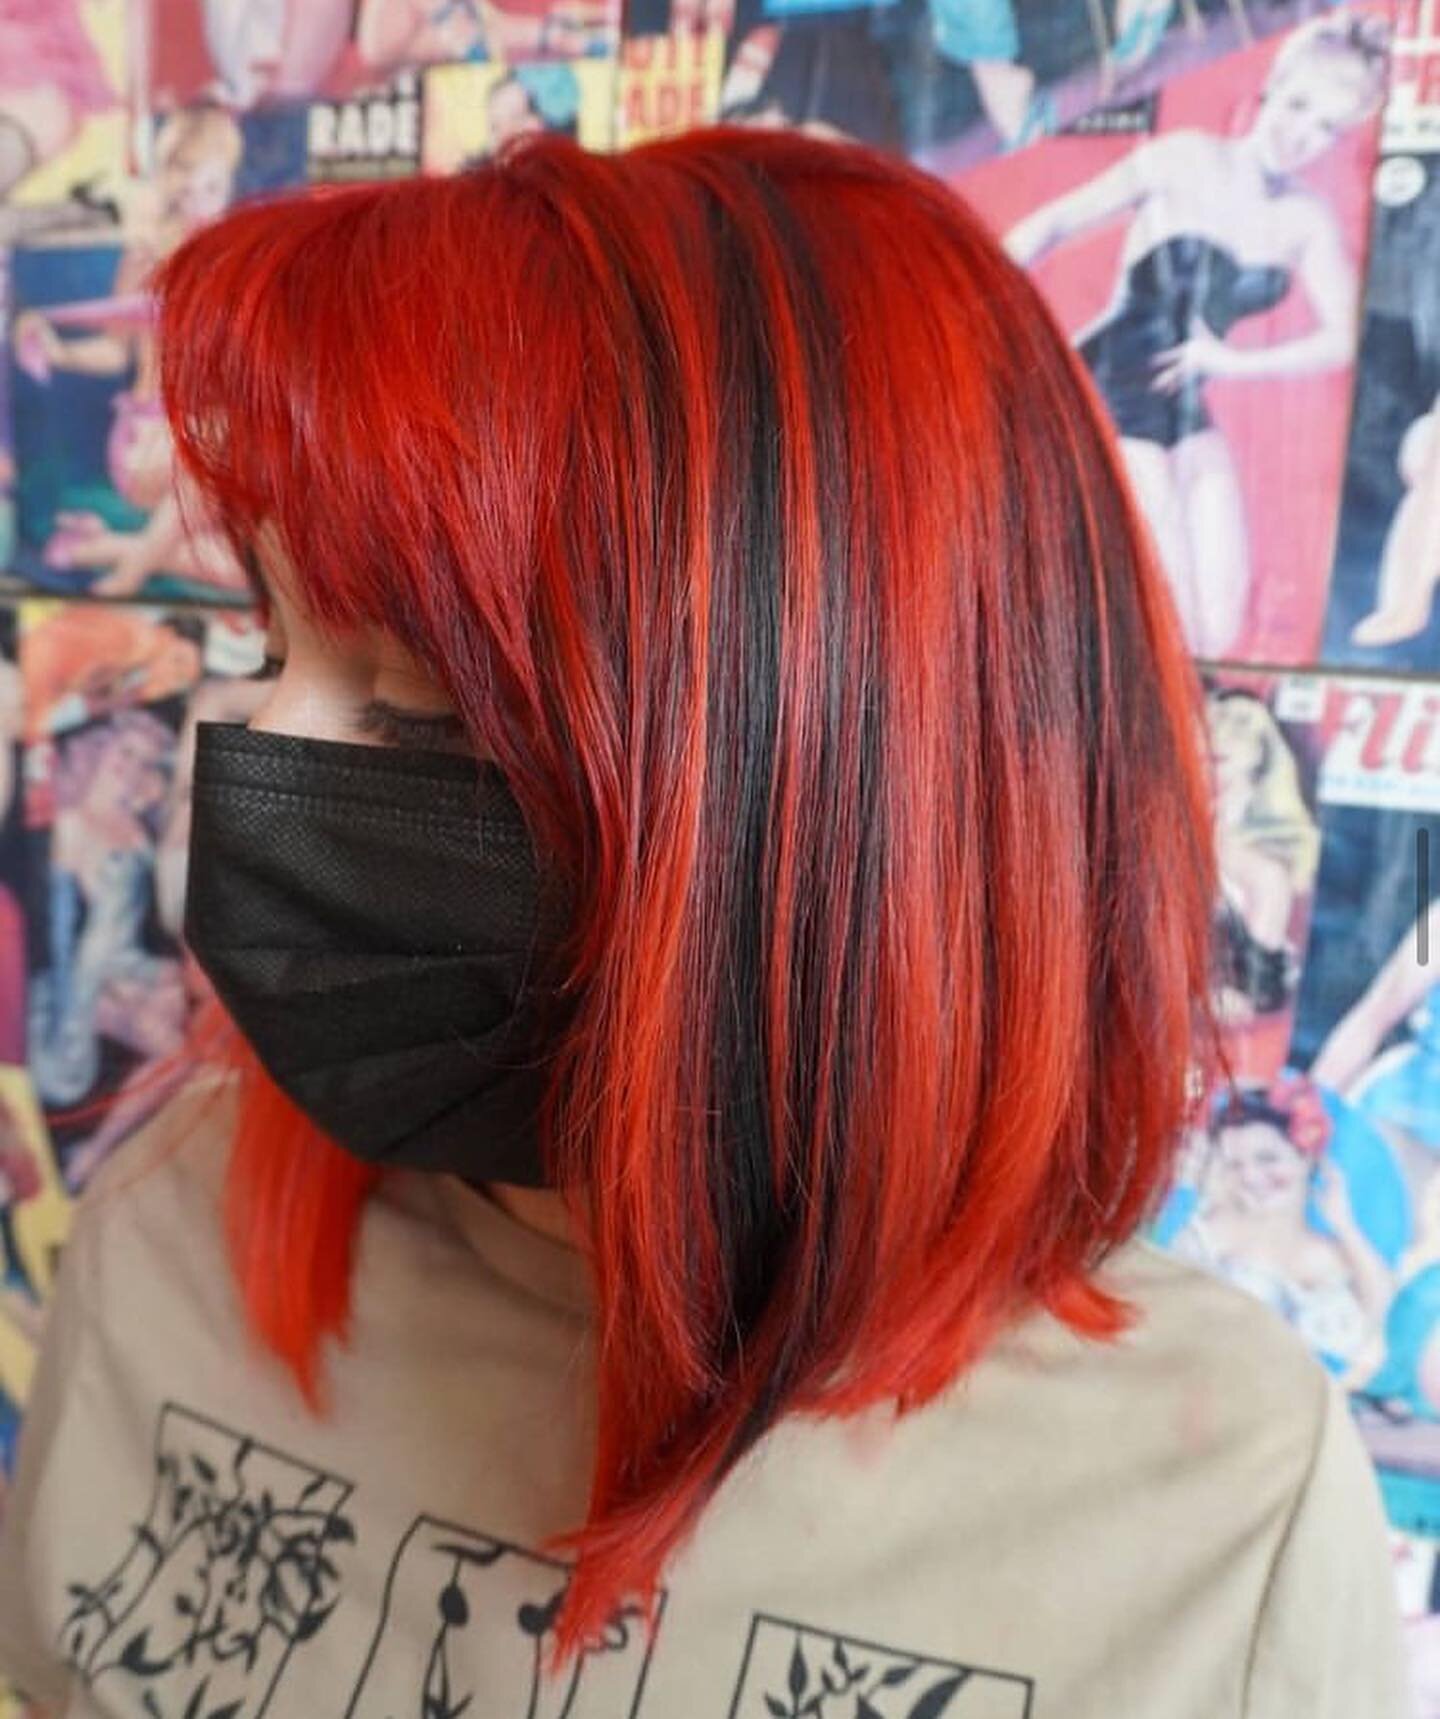 Heart-Shaped Box ❤️✖️

Creative Color &amp; Cut done by @alkalinebeauty here at @medusasalonny ‼️

If you didn&rsquo;t already know, Danielle (@alkalinebeauty ) will be departing on the 17th ✈️😰
..BUT she will be coming back to guest at the salon ev